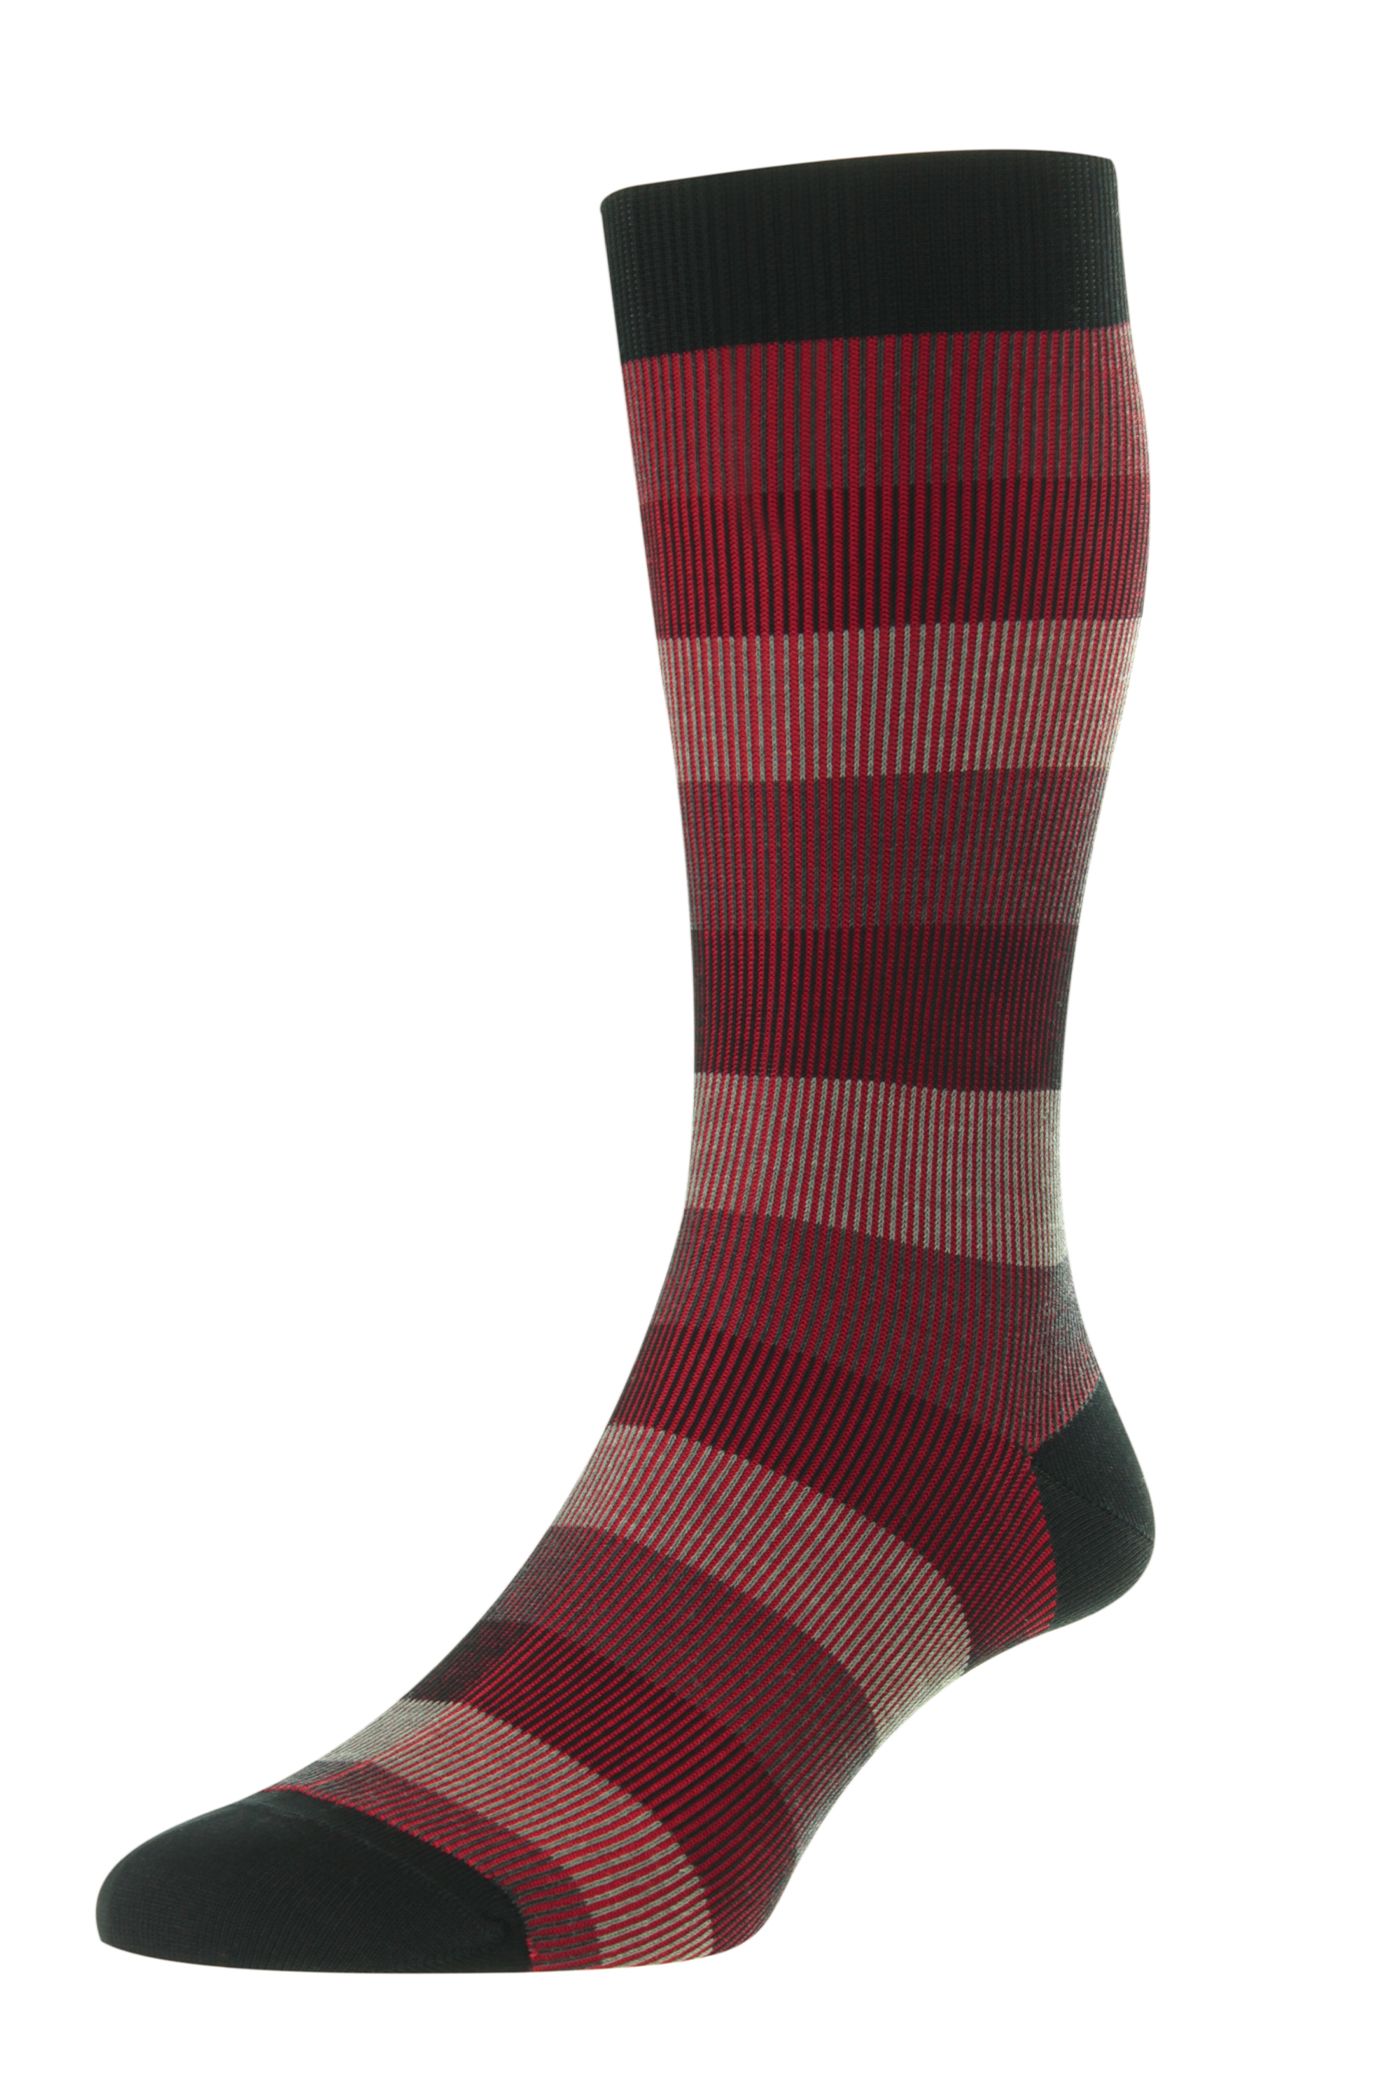 Cotton Collection "Stirling" Sock